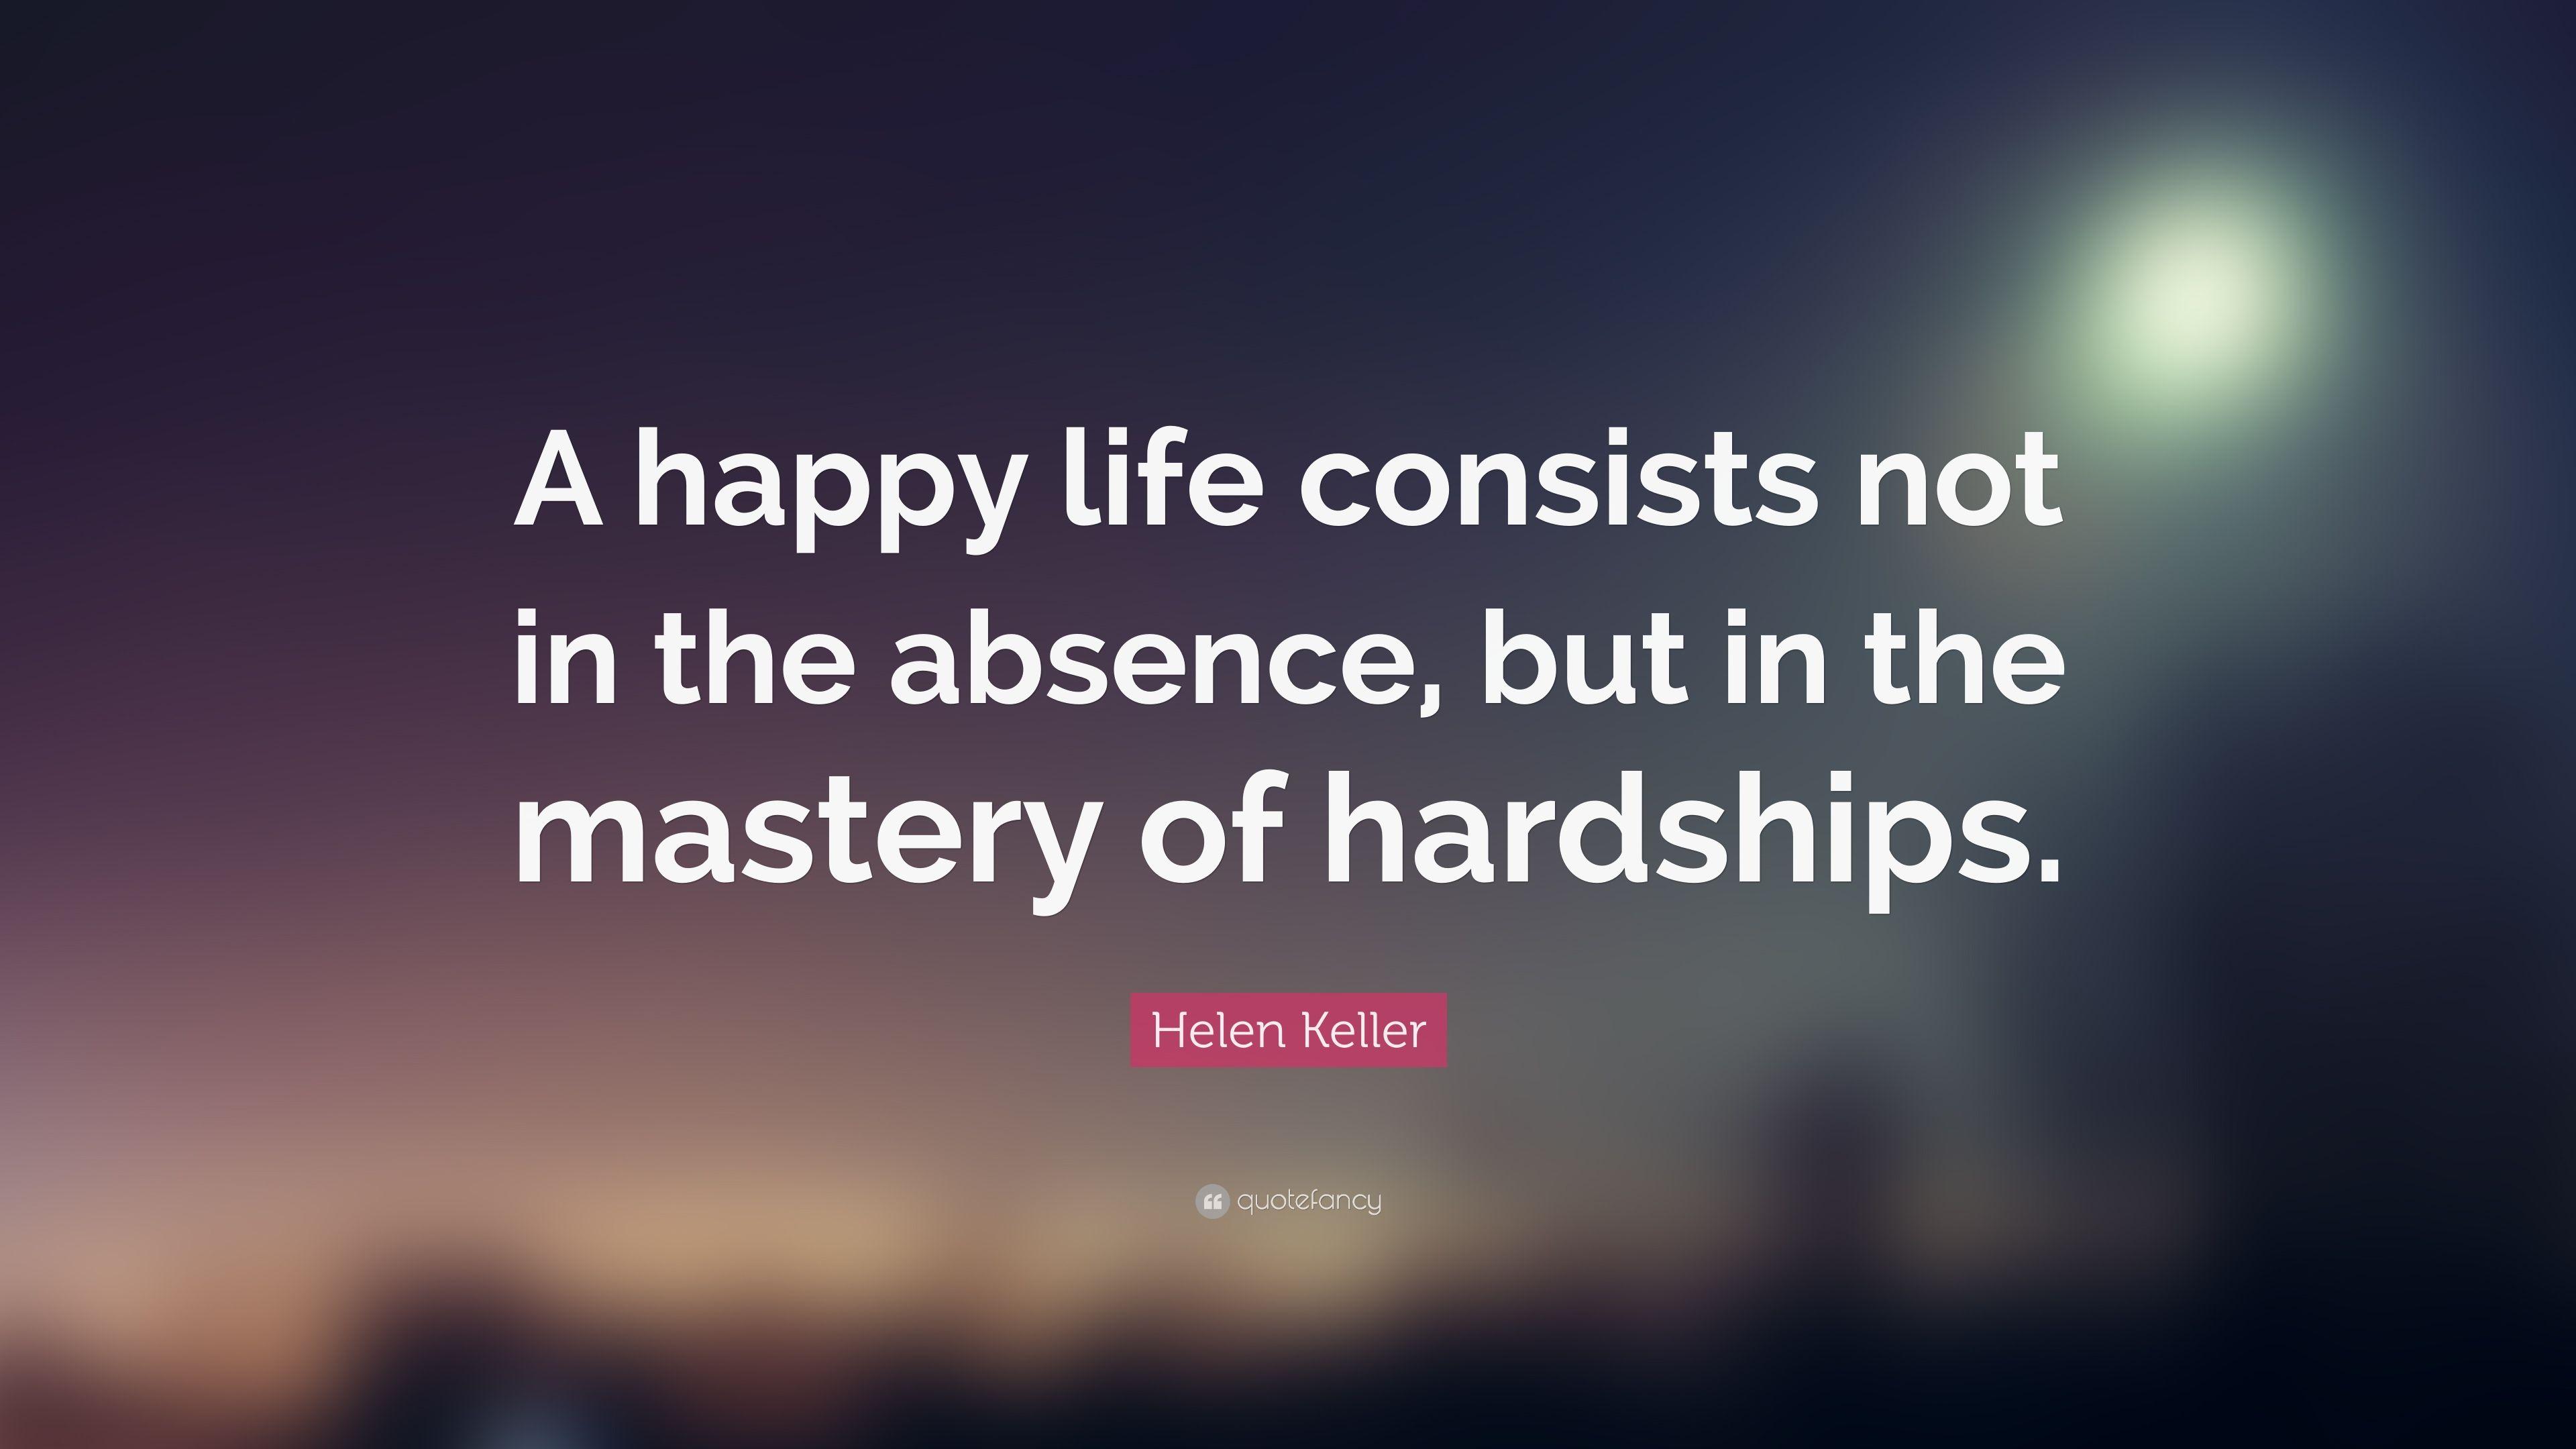 Helen Keller Quote: “A happy life consists not in the absence, but